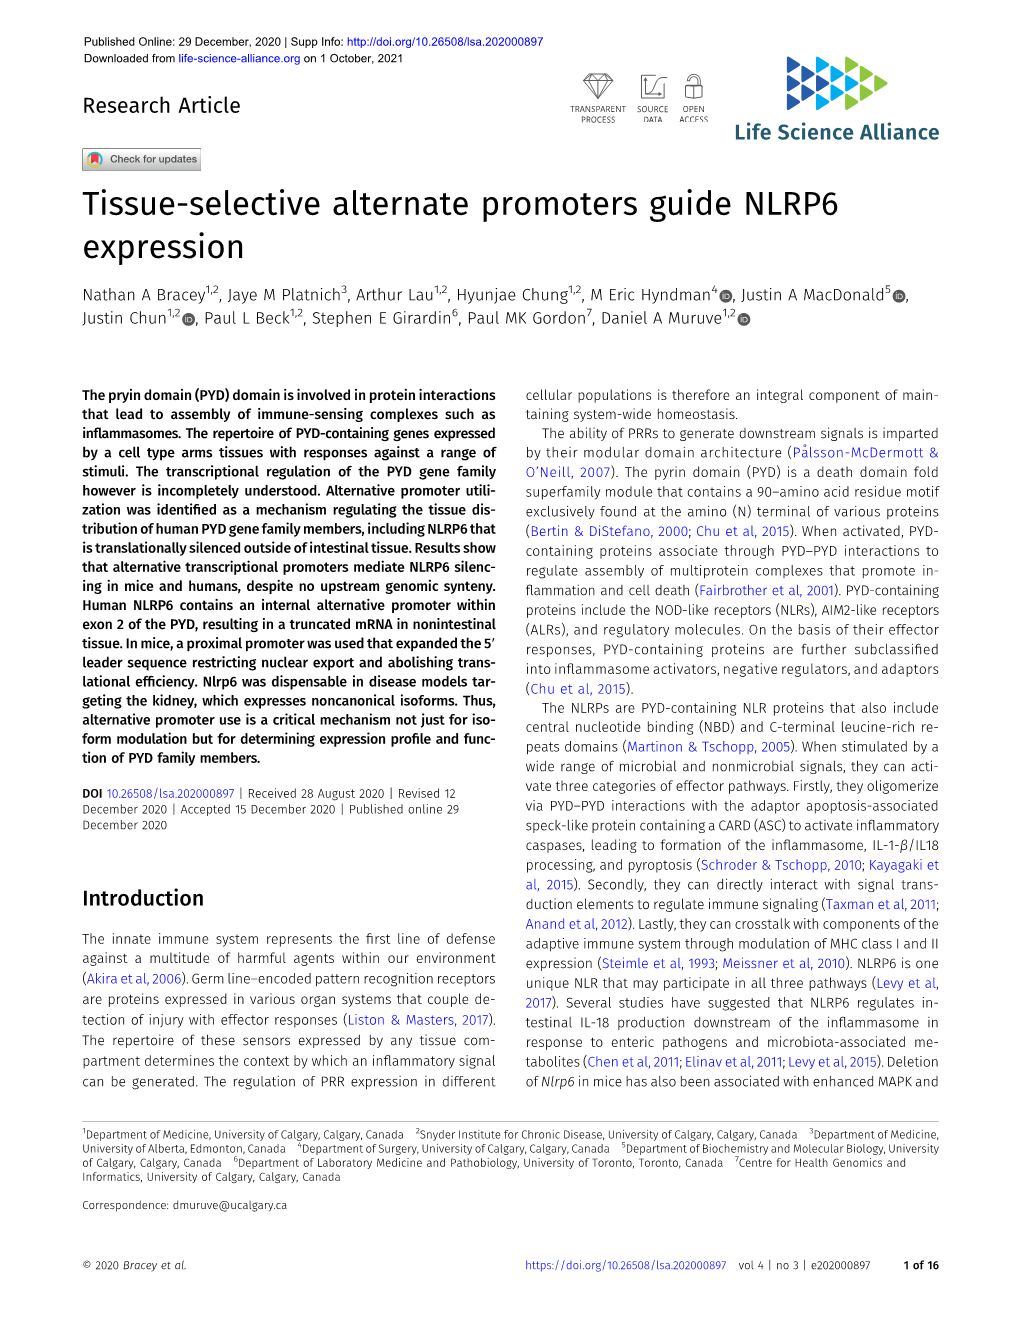 Tissue-Selective Alternate Promoters Guide NLRP6 Expression